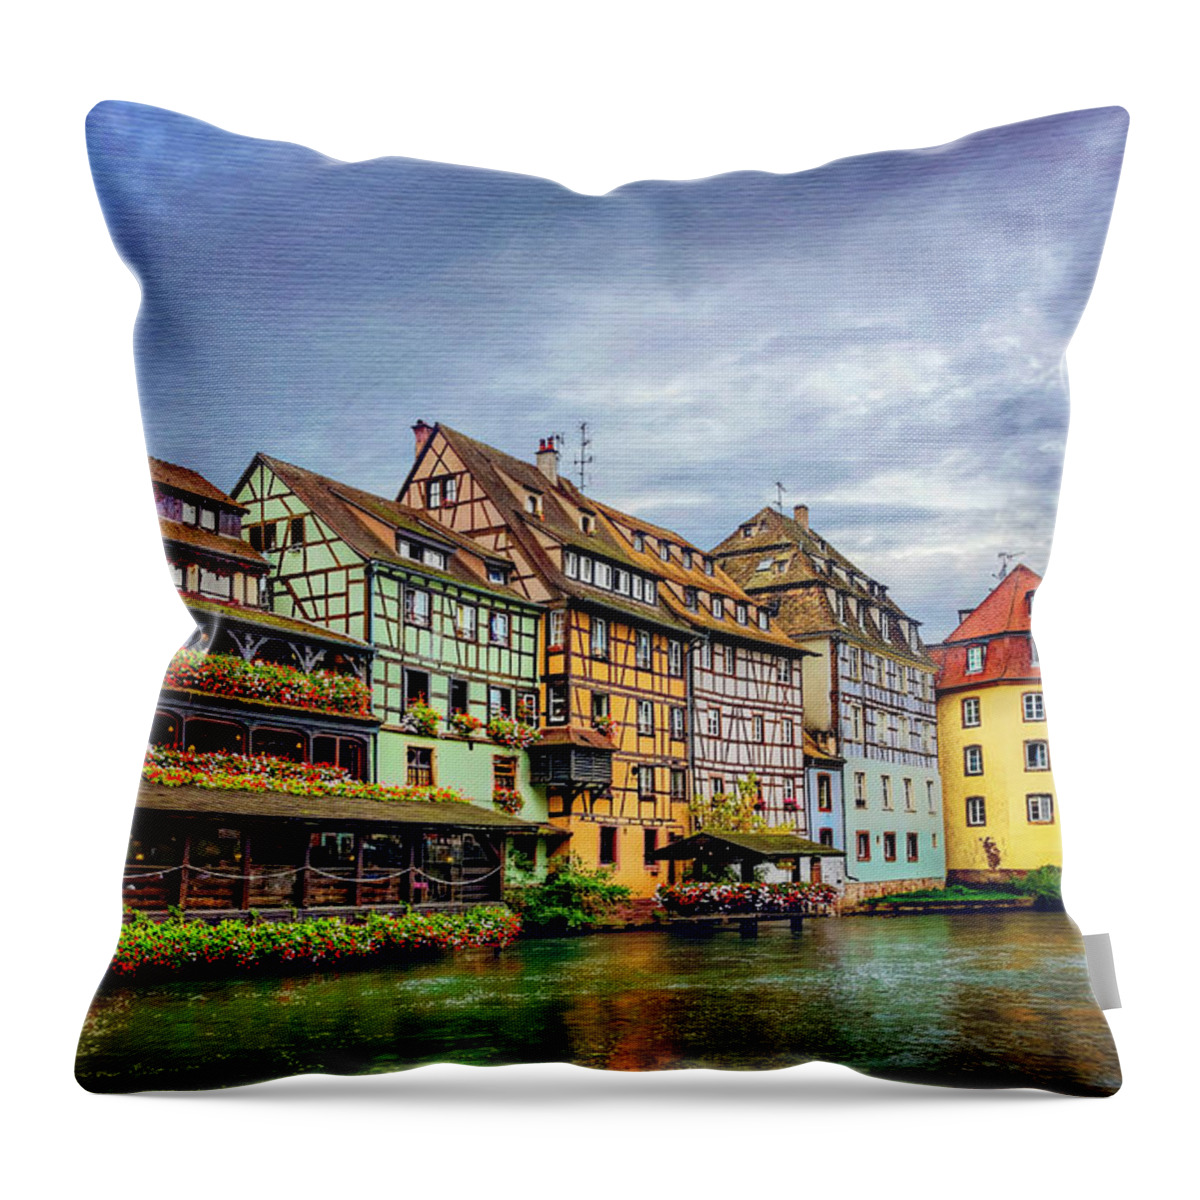 Strasbourg Throw Pillow featuring the photograph Stormy Skies in Strasbourg by Carol Japp